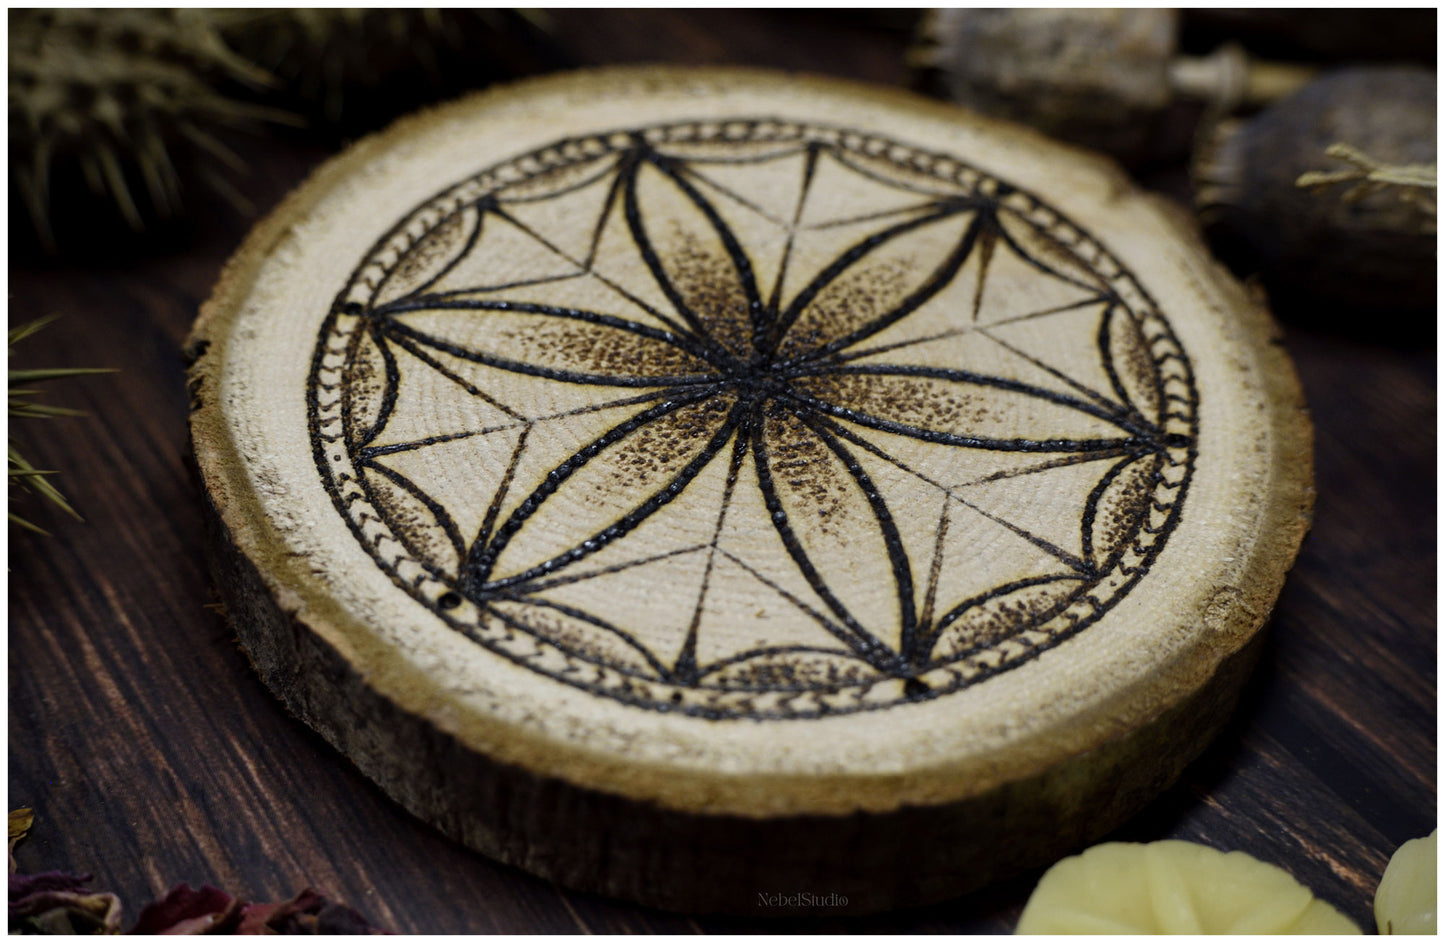 Hexafoil Web pyrographed wood